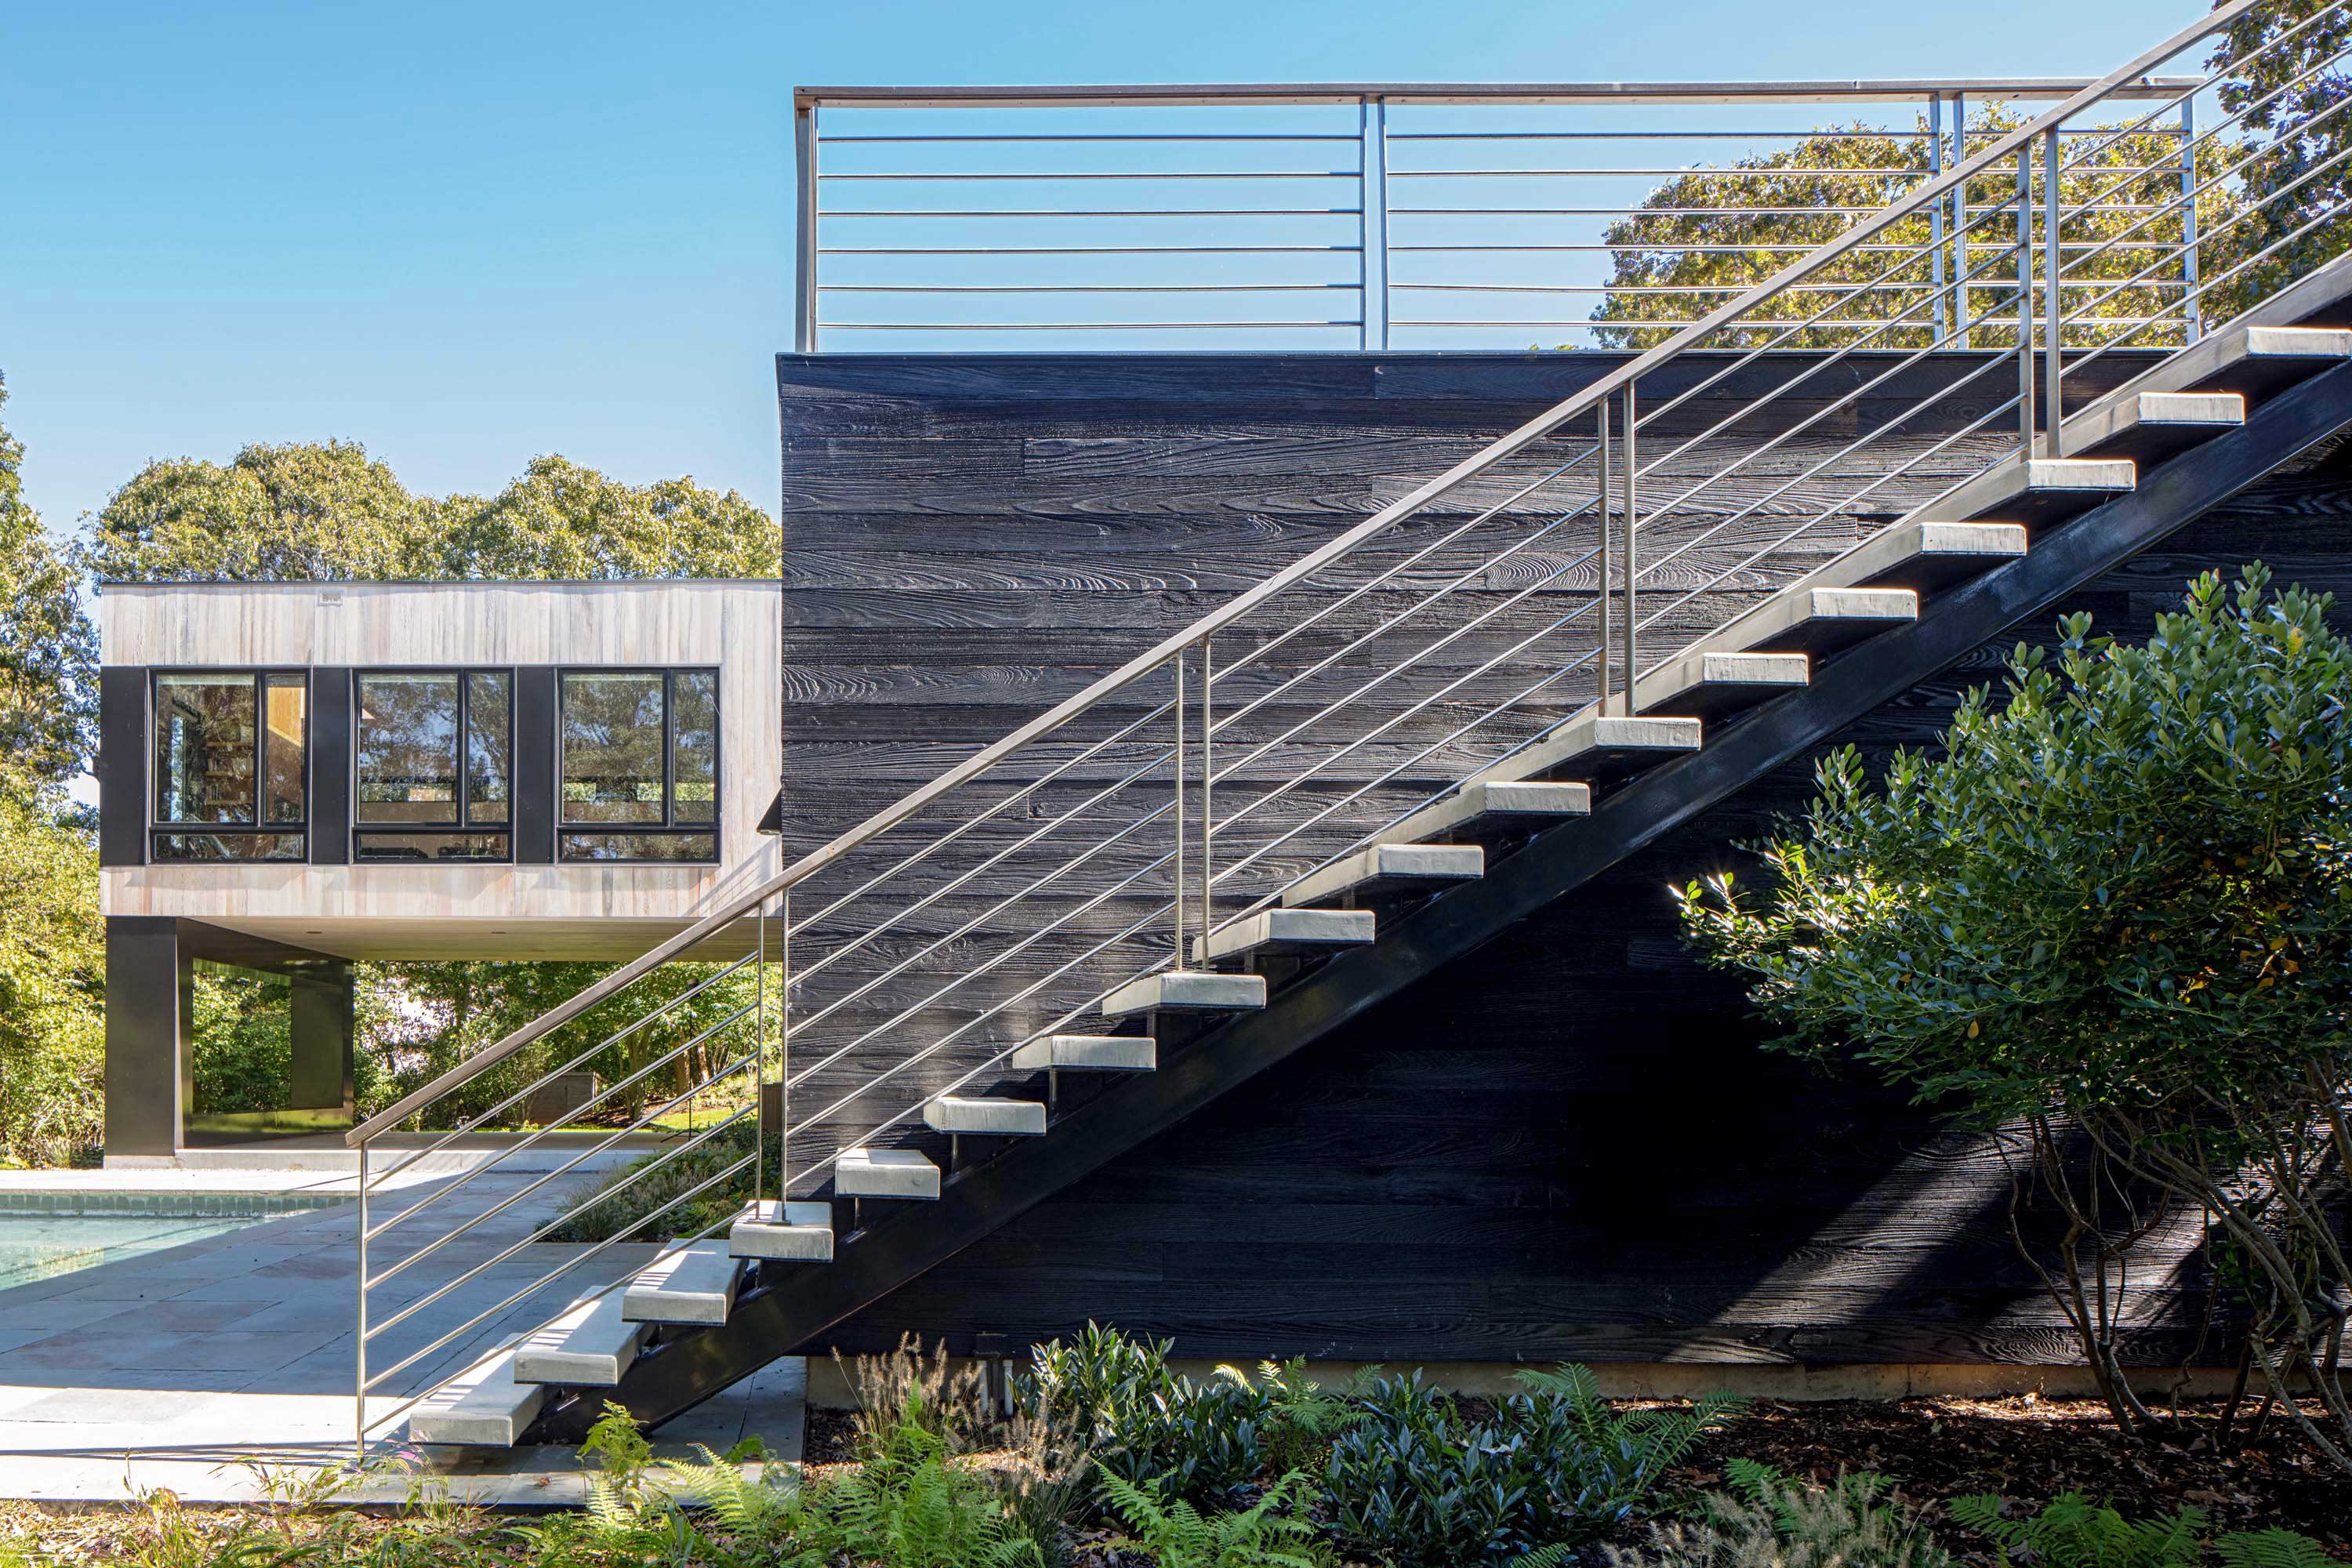 Detail shot of the exterior staircase attached to Bridgehampton House by Specht Novak Architects, shot by Taggart Sorensen.